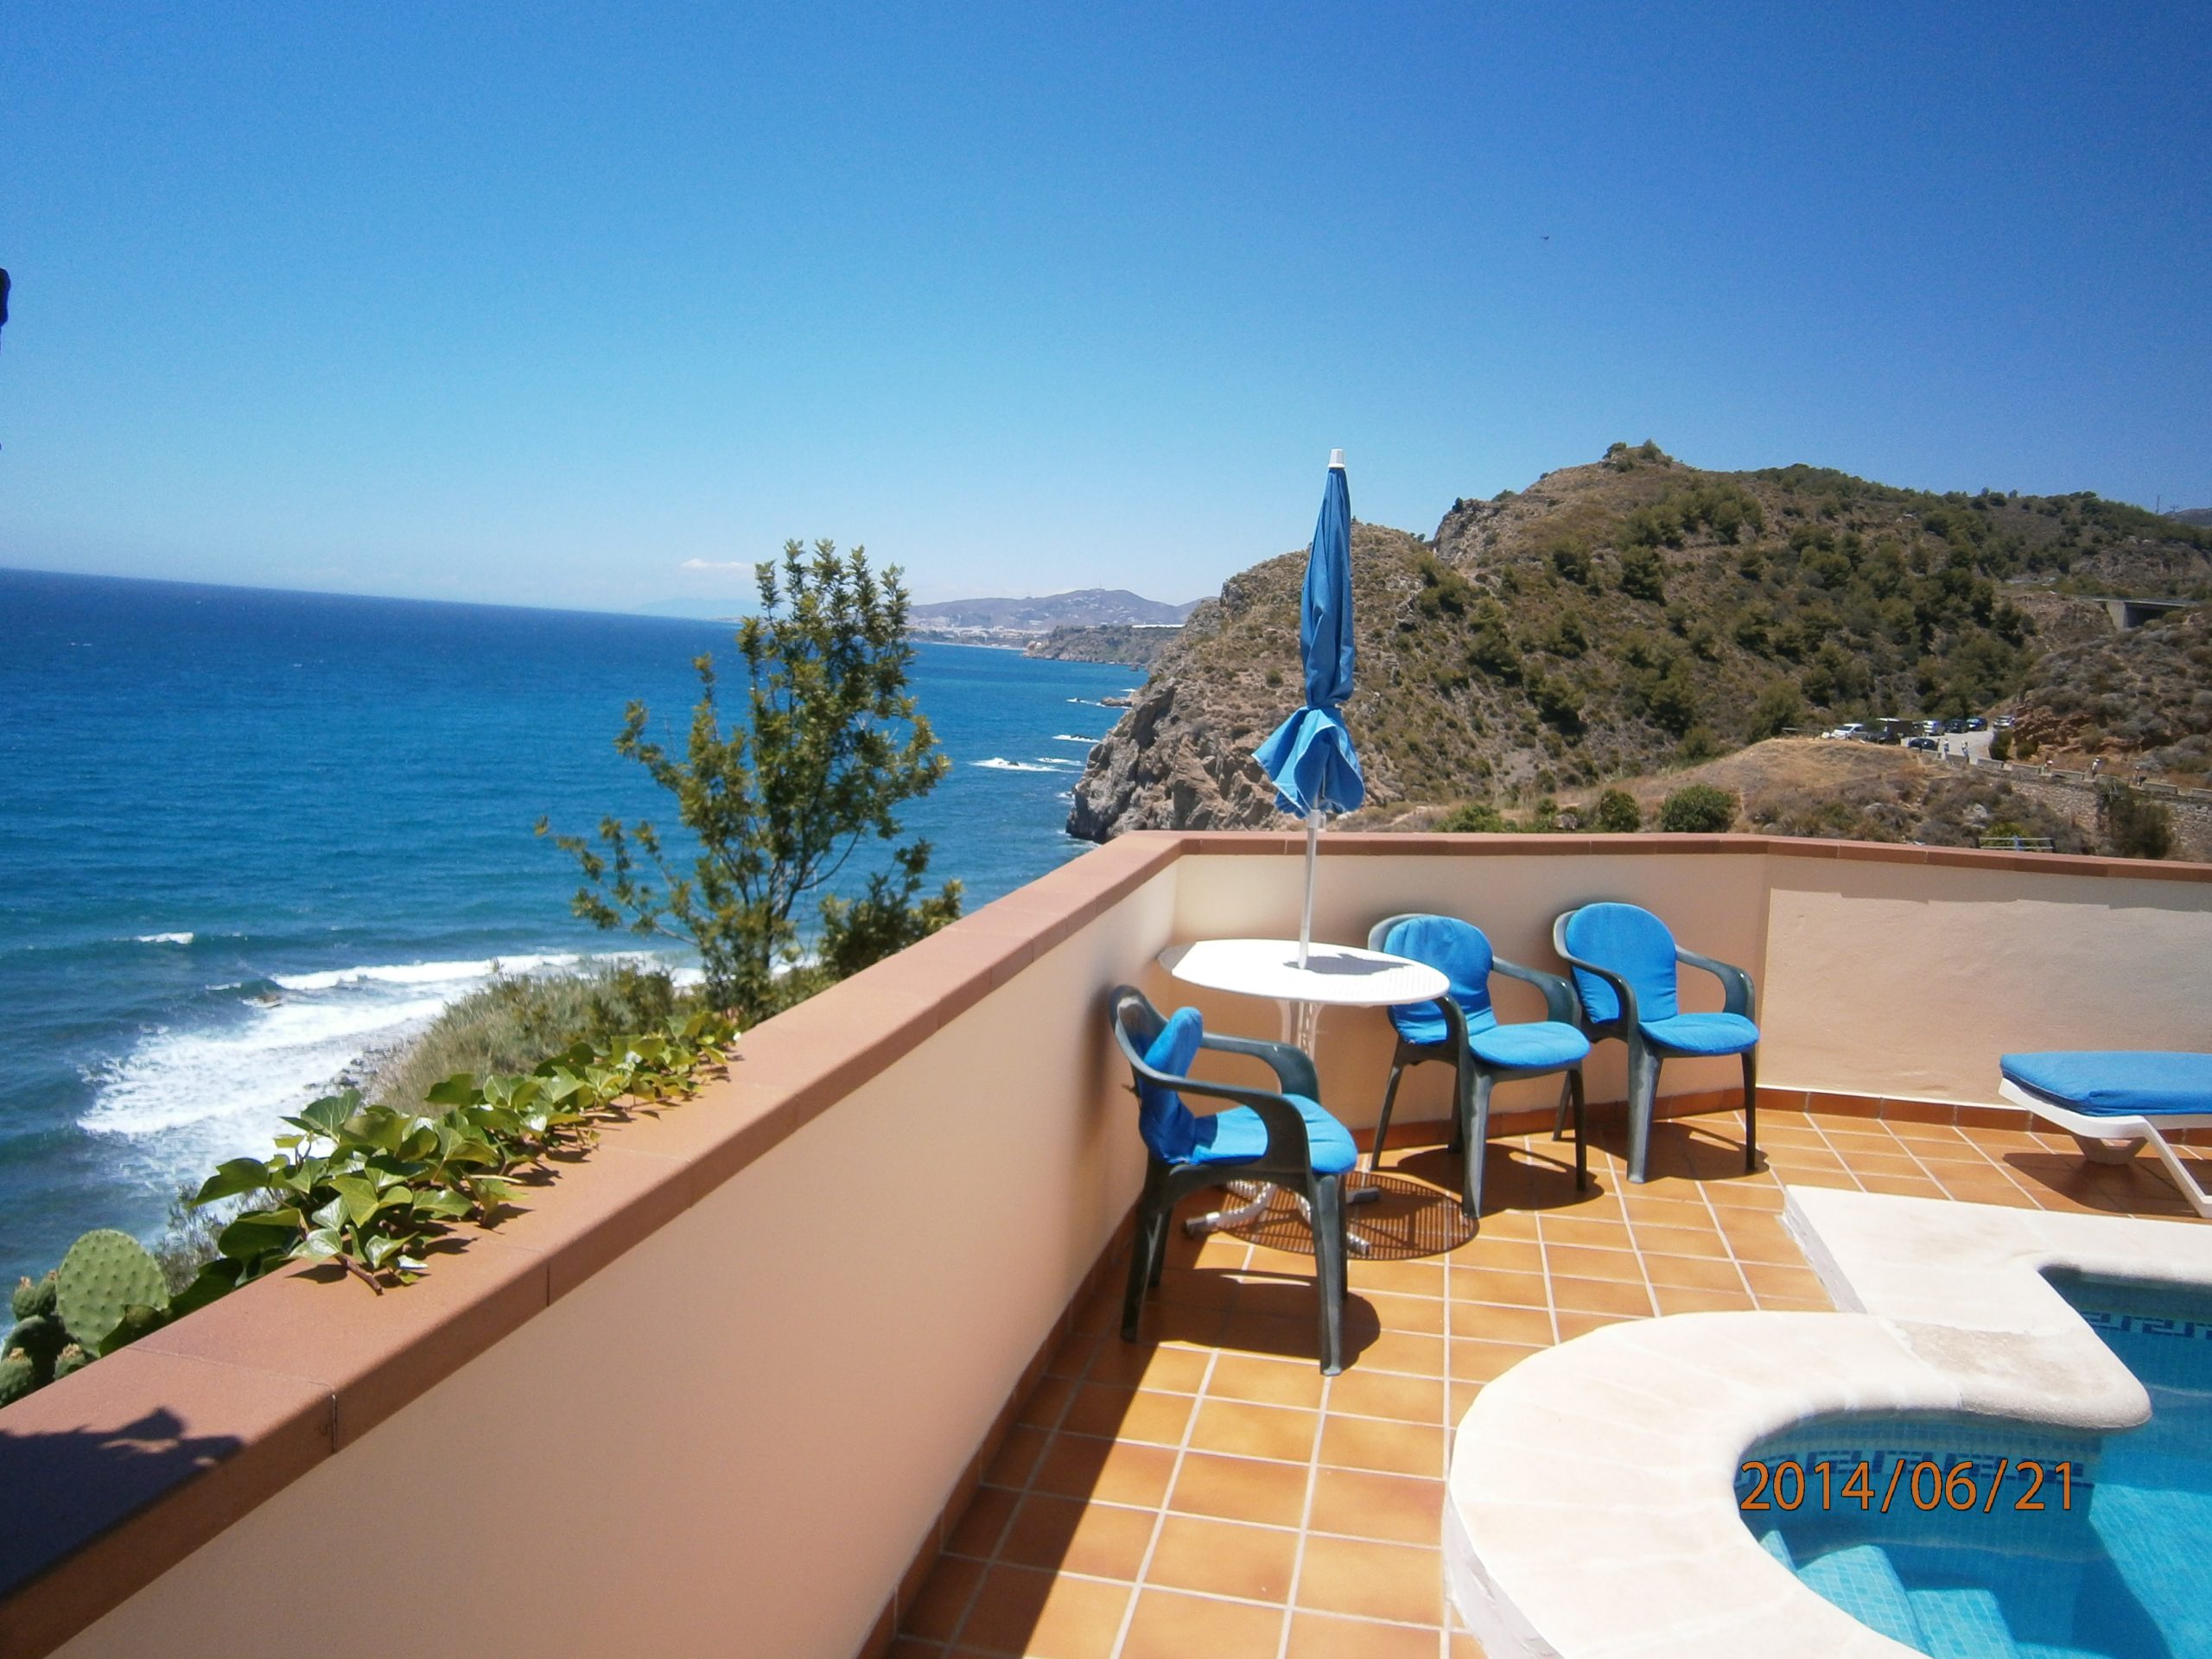 Tranquil Villa For 2-4 People With Pool On The Seaside By Nerja